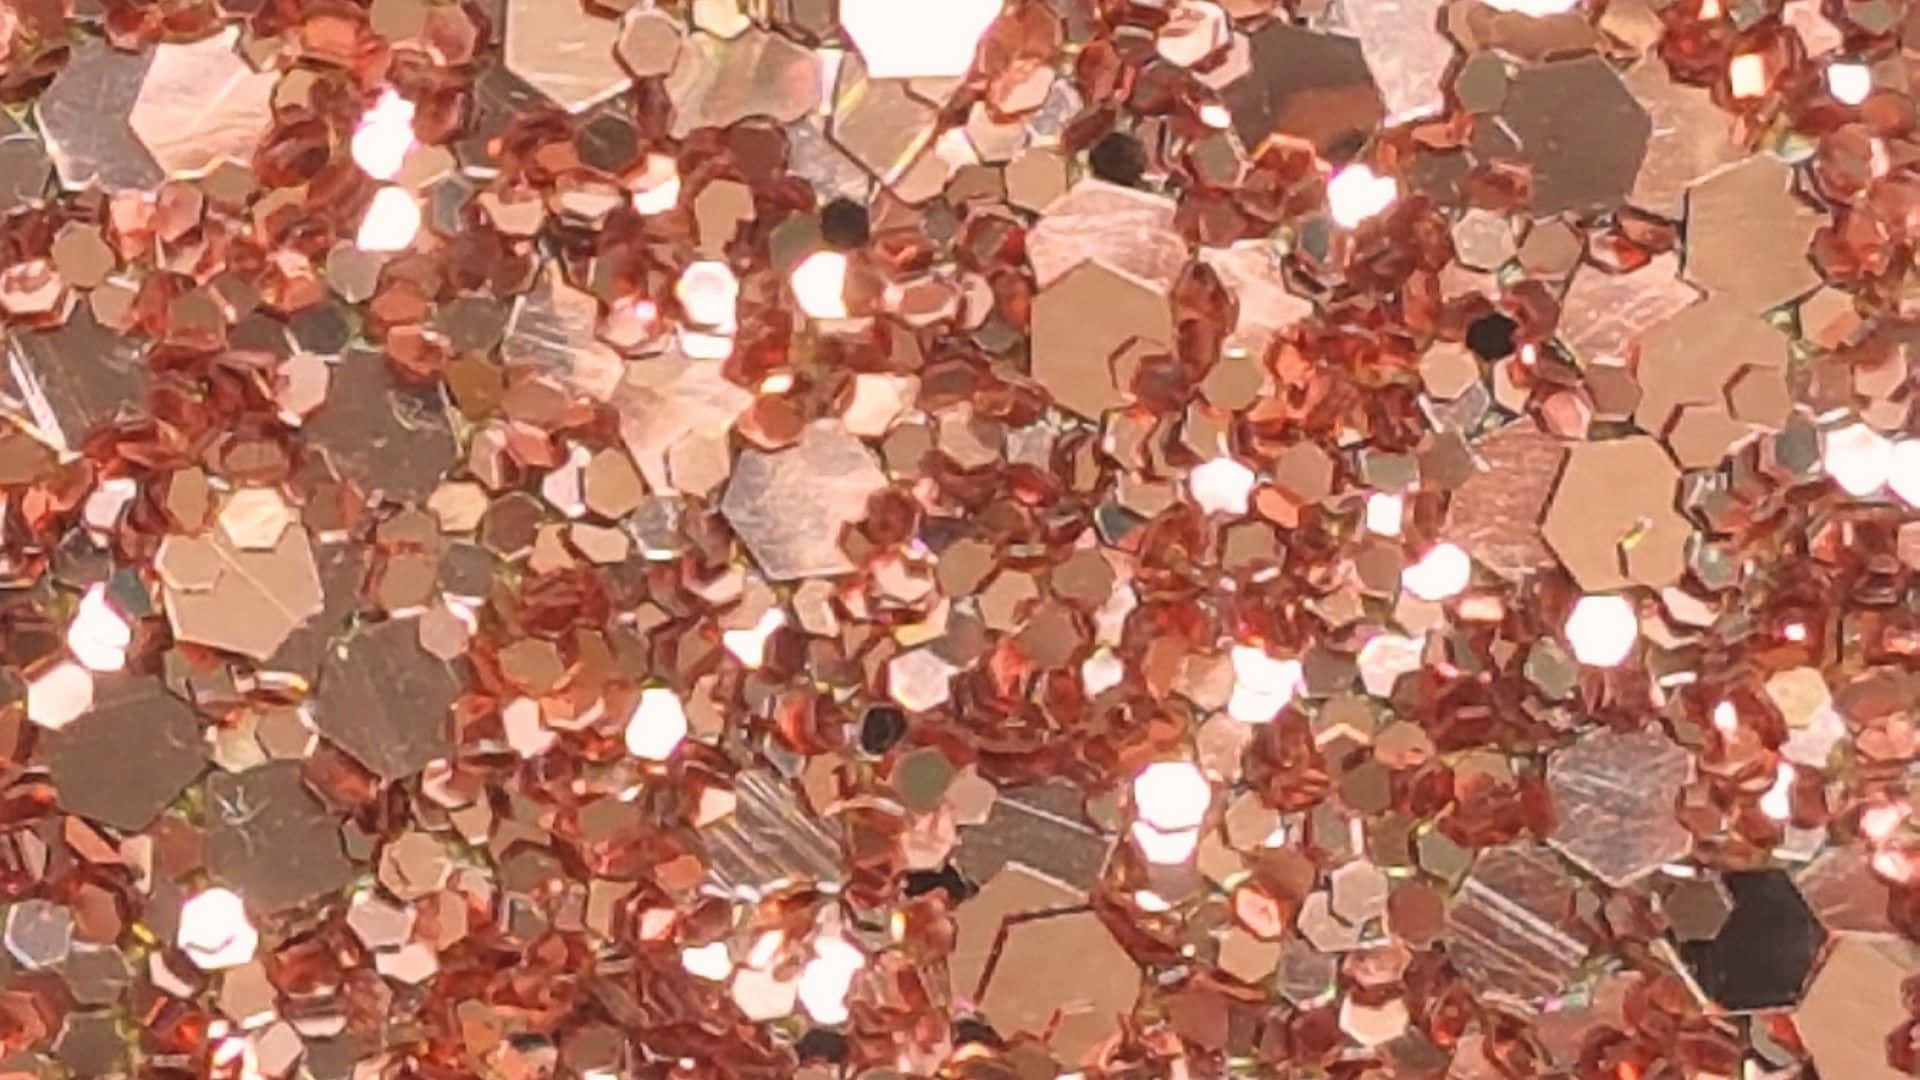 Bring some sparkle to your life with Orange Glitter Wallpaper